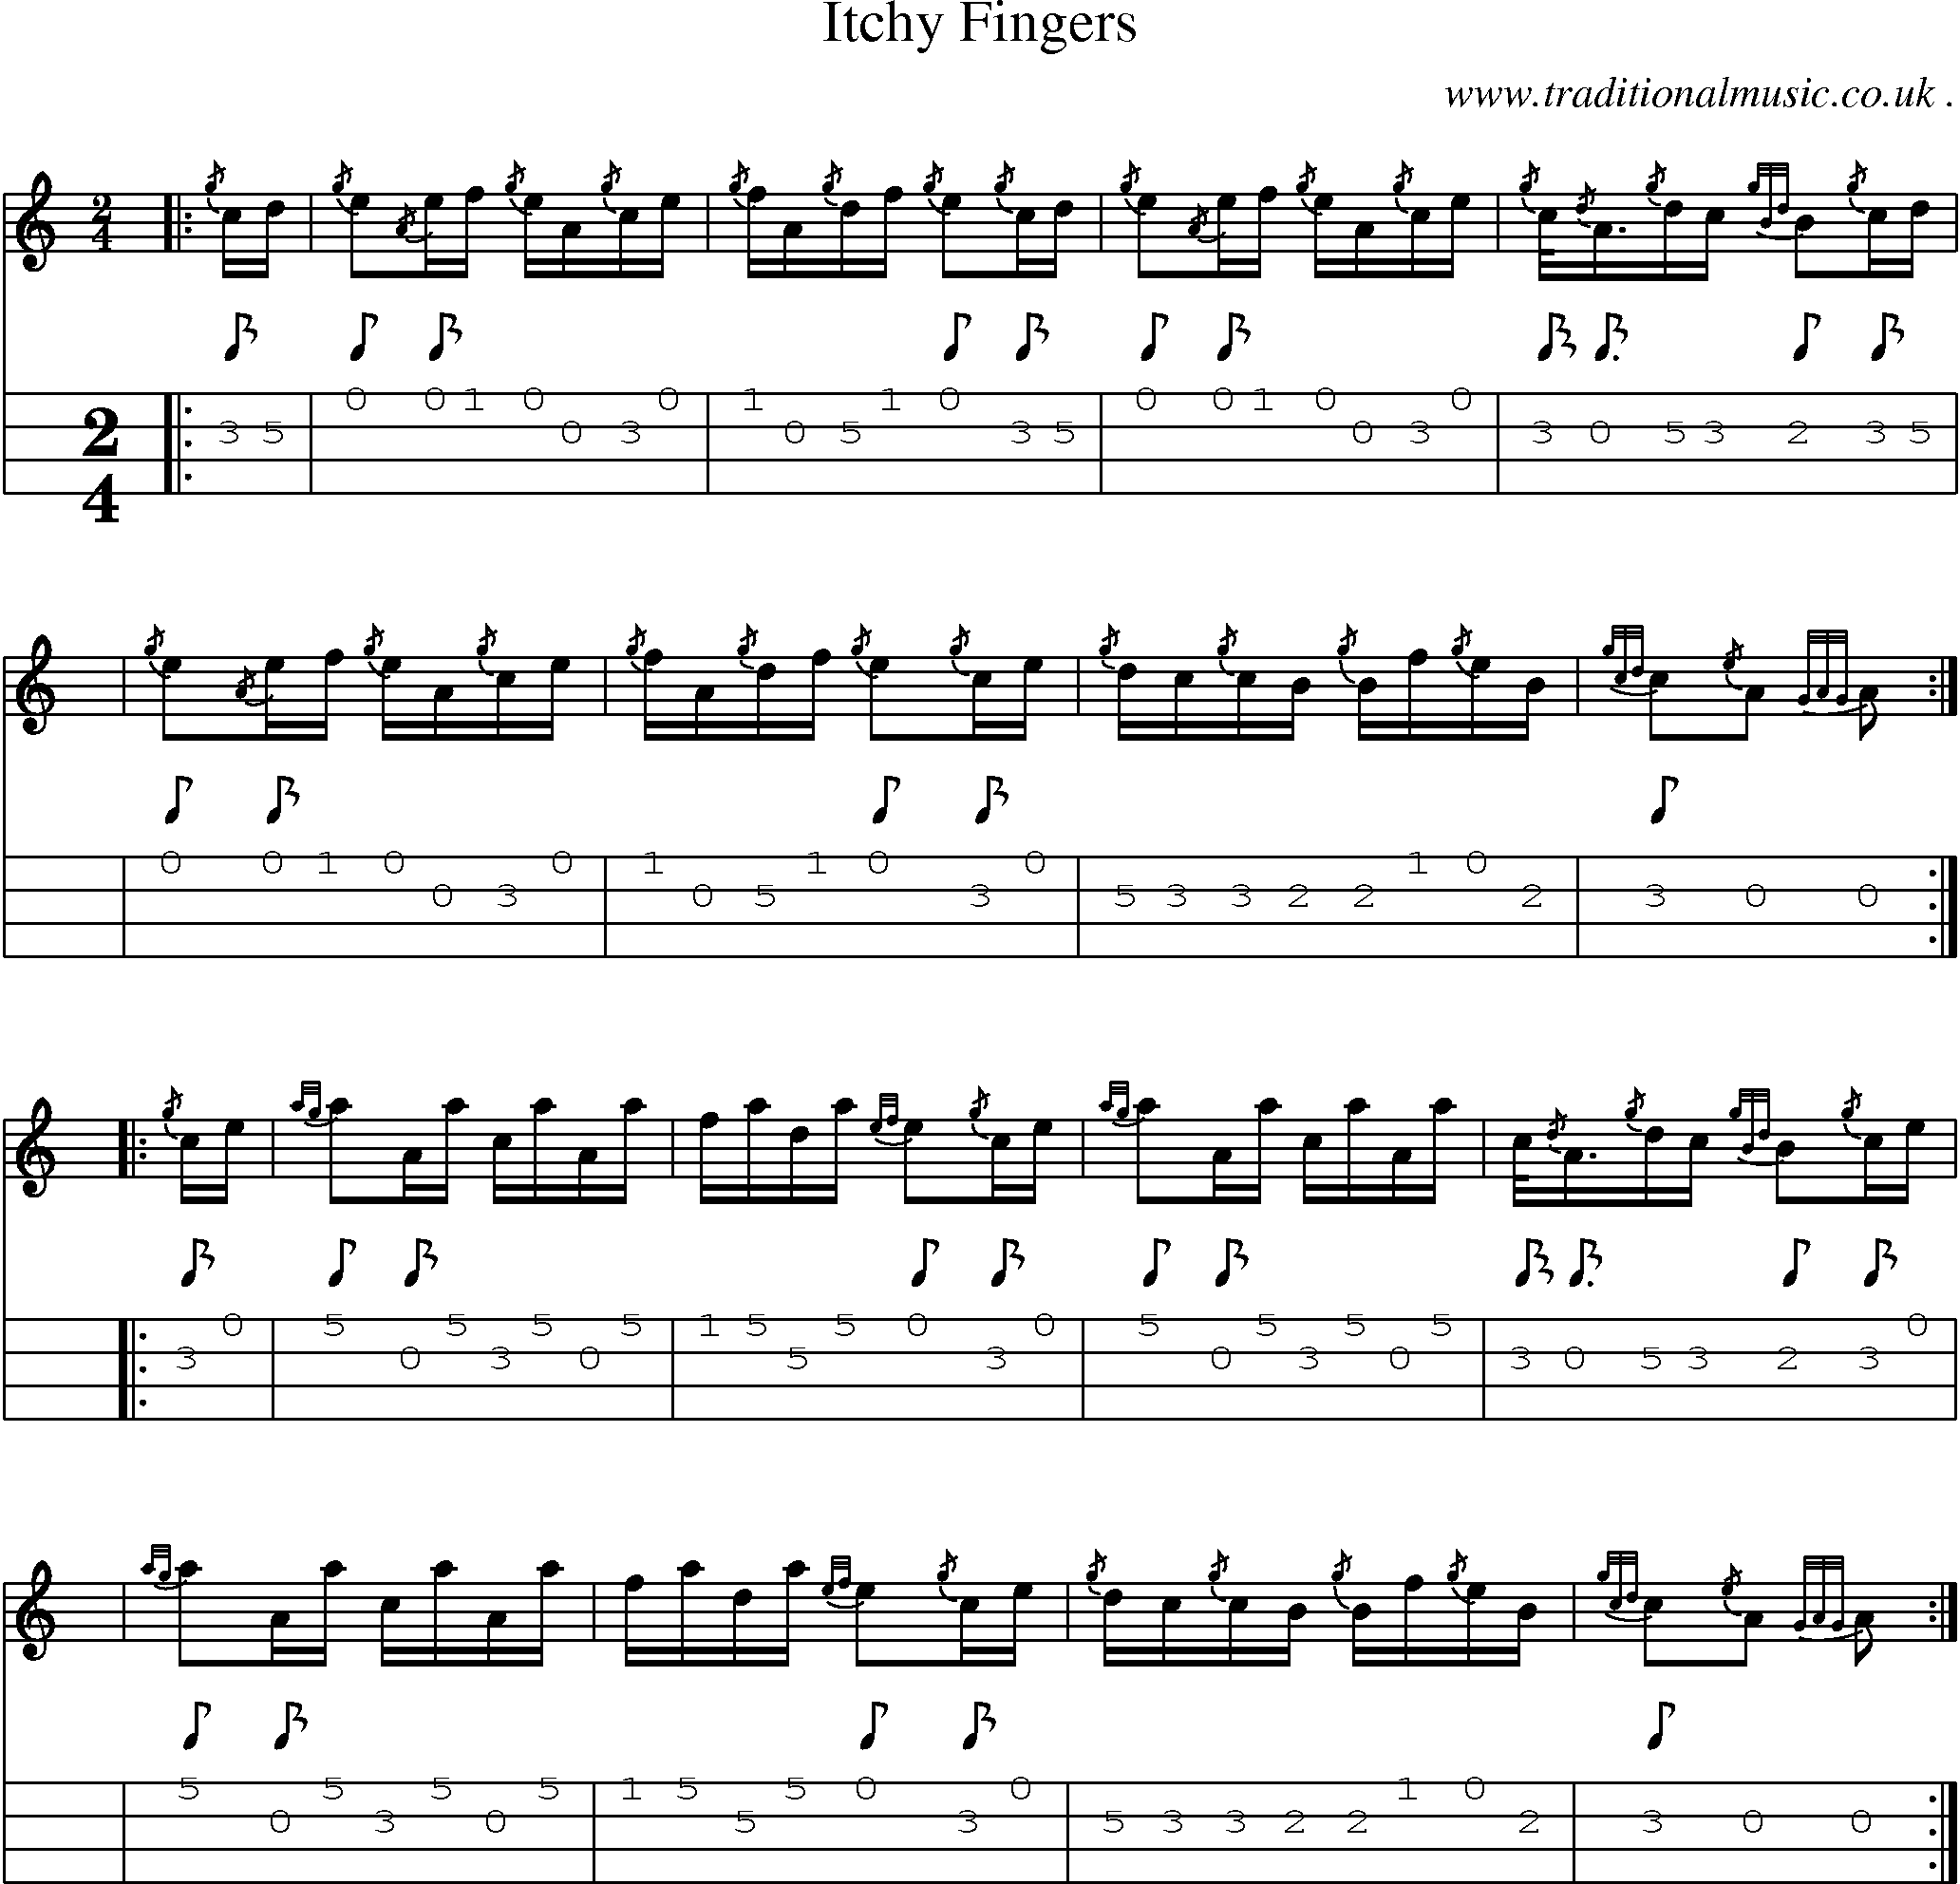 Sheet-music  score, Chords and Mandolin Tabs for Itchy Fingers